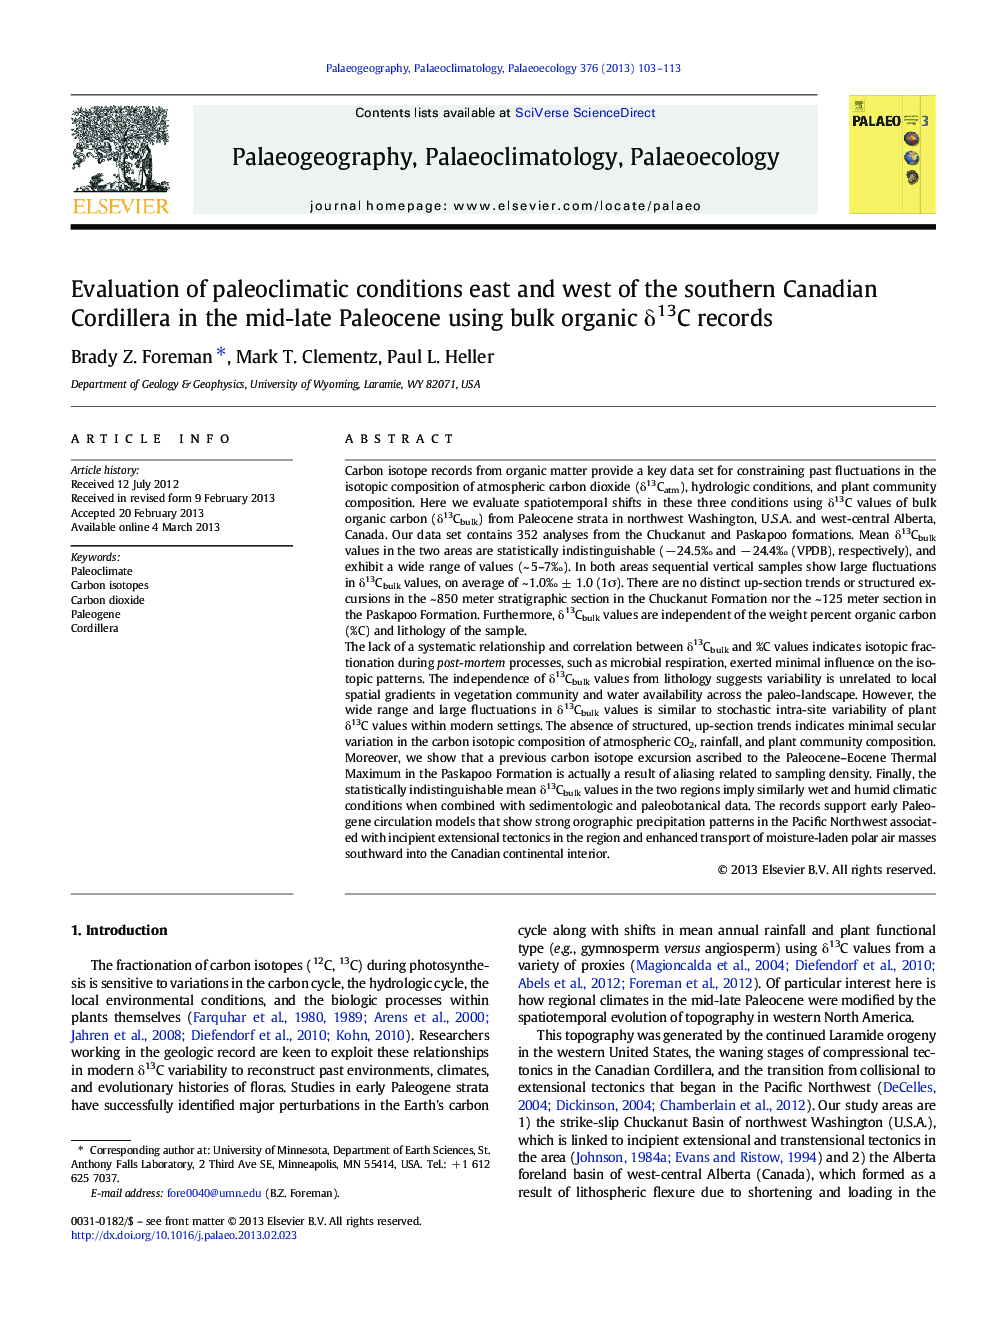 Evaluation of paleoclimatic conditions east and west of the southern Canadian Cordillera in the mid-late Paleocene using bulk organic δ13C records